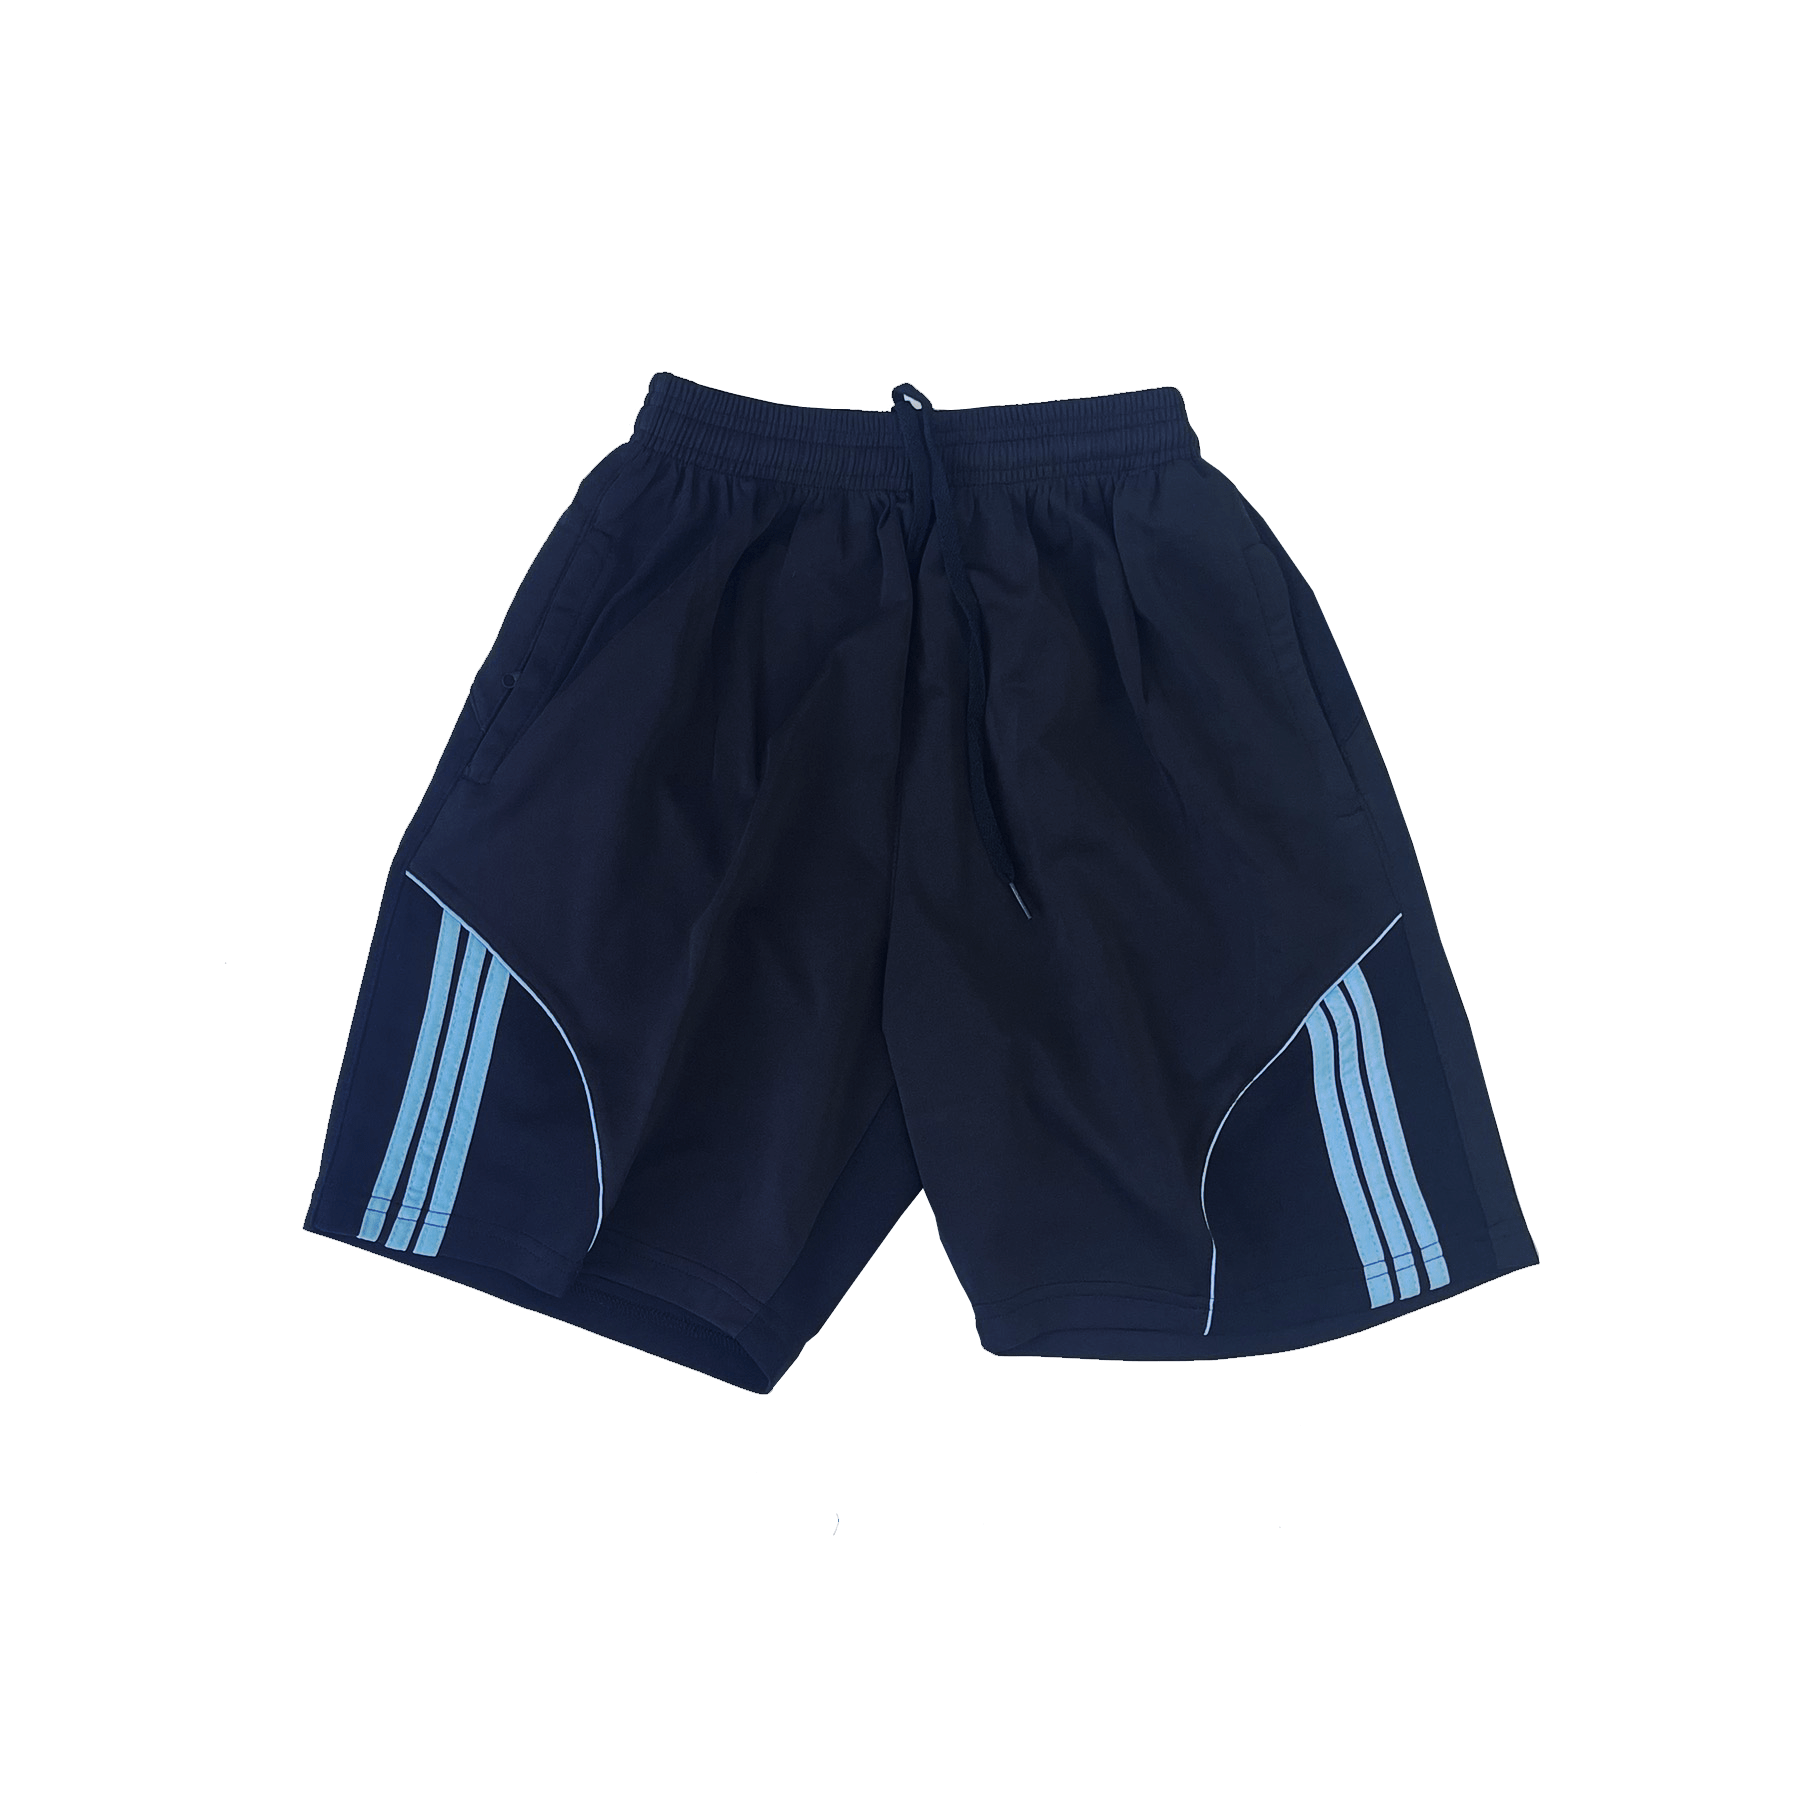  Cheap Price Men Short Pants High Quality Ready To Ship Odm Each One In Opp Bag Made In Vietnam Manufacturer 4